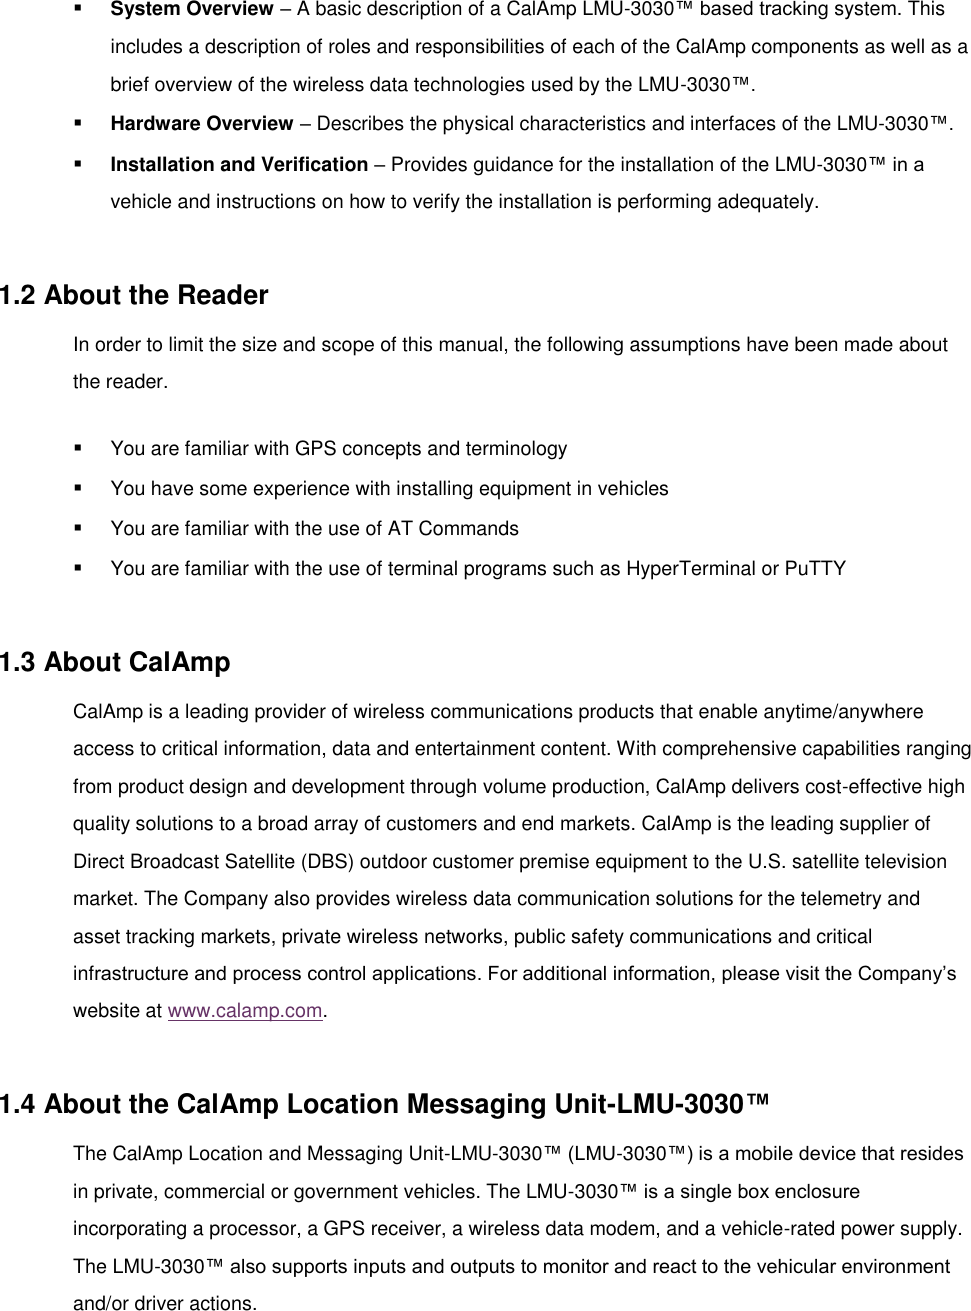  System Overview – A basic description of a CalAmp LMU-3030™ based tracking system. This includes a description of roles and responsibilities of each of the CalAmp components as well as a brief overview of the wireless data technologies used by the LMU-3030™.  Hardware Overview – Describes the physical characteristics and interfaces of the LMU-3030™.  Installation and Verification – Provides guidance for the installation of the LMU-3030™ in a vehicle and instructions on how to verify the installation is performing adequately.  1.2 About the Reader In order to limit the size and scope of this manual, the following assumptions have been made about the reader.  You are familiar with GPS concepts and terminology  You have some experience with installing equipment in vehicles  You are familiar with the use of AT Commands  You are familiar with the use of terminal programs such as HyperTerminal or PuTTY  1.3 About CalAmp CalAmp is a leading provider of wireless communications products that enable anytime/anywhere access to critical information, data and entertainment content. With comprehensive capabilities ranging from product design and development through volume production, CalAmp delivers cost-effective high quality solutions to a broad array of customers and end markets. CalAmp is the leading supplier of Direct Broadcast Satellite (DBS) outdoor customer premise equipment to the U.S. satellite television market. The Company also provides wireless data communication solutions for the telemetry and asset tracking markets, private wireless networks, public safety communications and critical infrastructure and process control applications. For additional information, please visit the Company’s website at www.calamp.com.  1.4 About the CalAmp Location Messaging Unit-LMU-3030™ The CalAmp Location and Messaging Unit-LMU-3030™ (LMU-3030™) is a mobile device that resides in private, commercial or government vehicles. The LMU-3030™ is a single box enclosure incorporating a processor, a GPS receiver, a wireless data modem, and a vehicle-rated power supply. The LMU-3030™ also supports inputs and outputs to monitor and react to the vehicular environment and/or driver actions. 